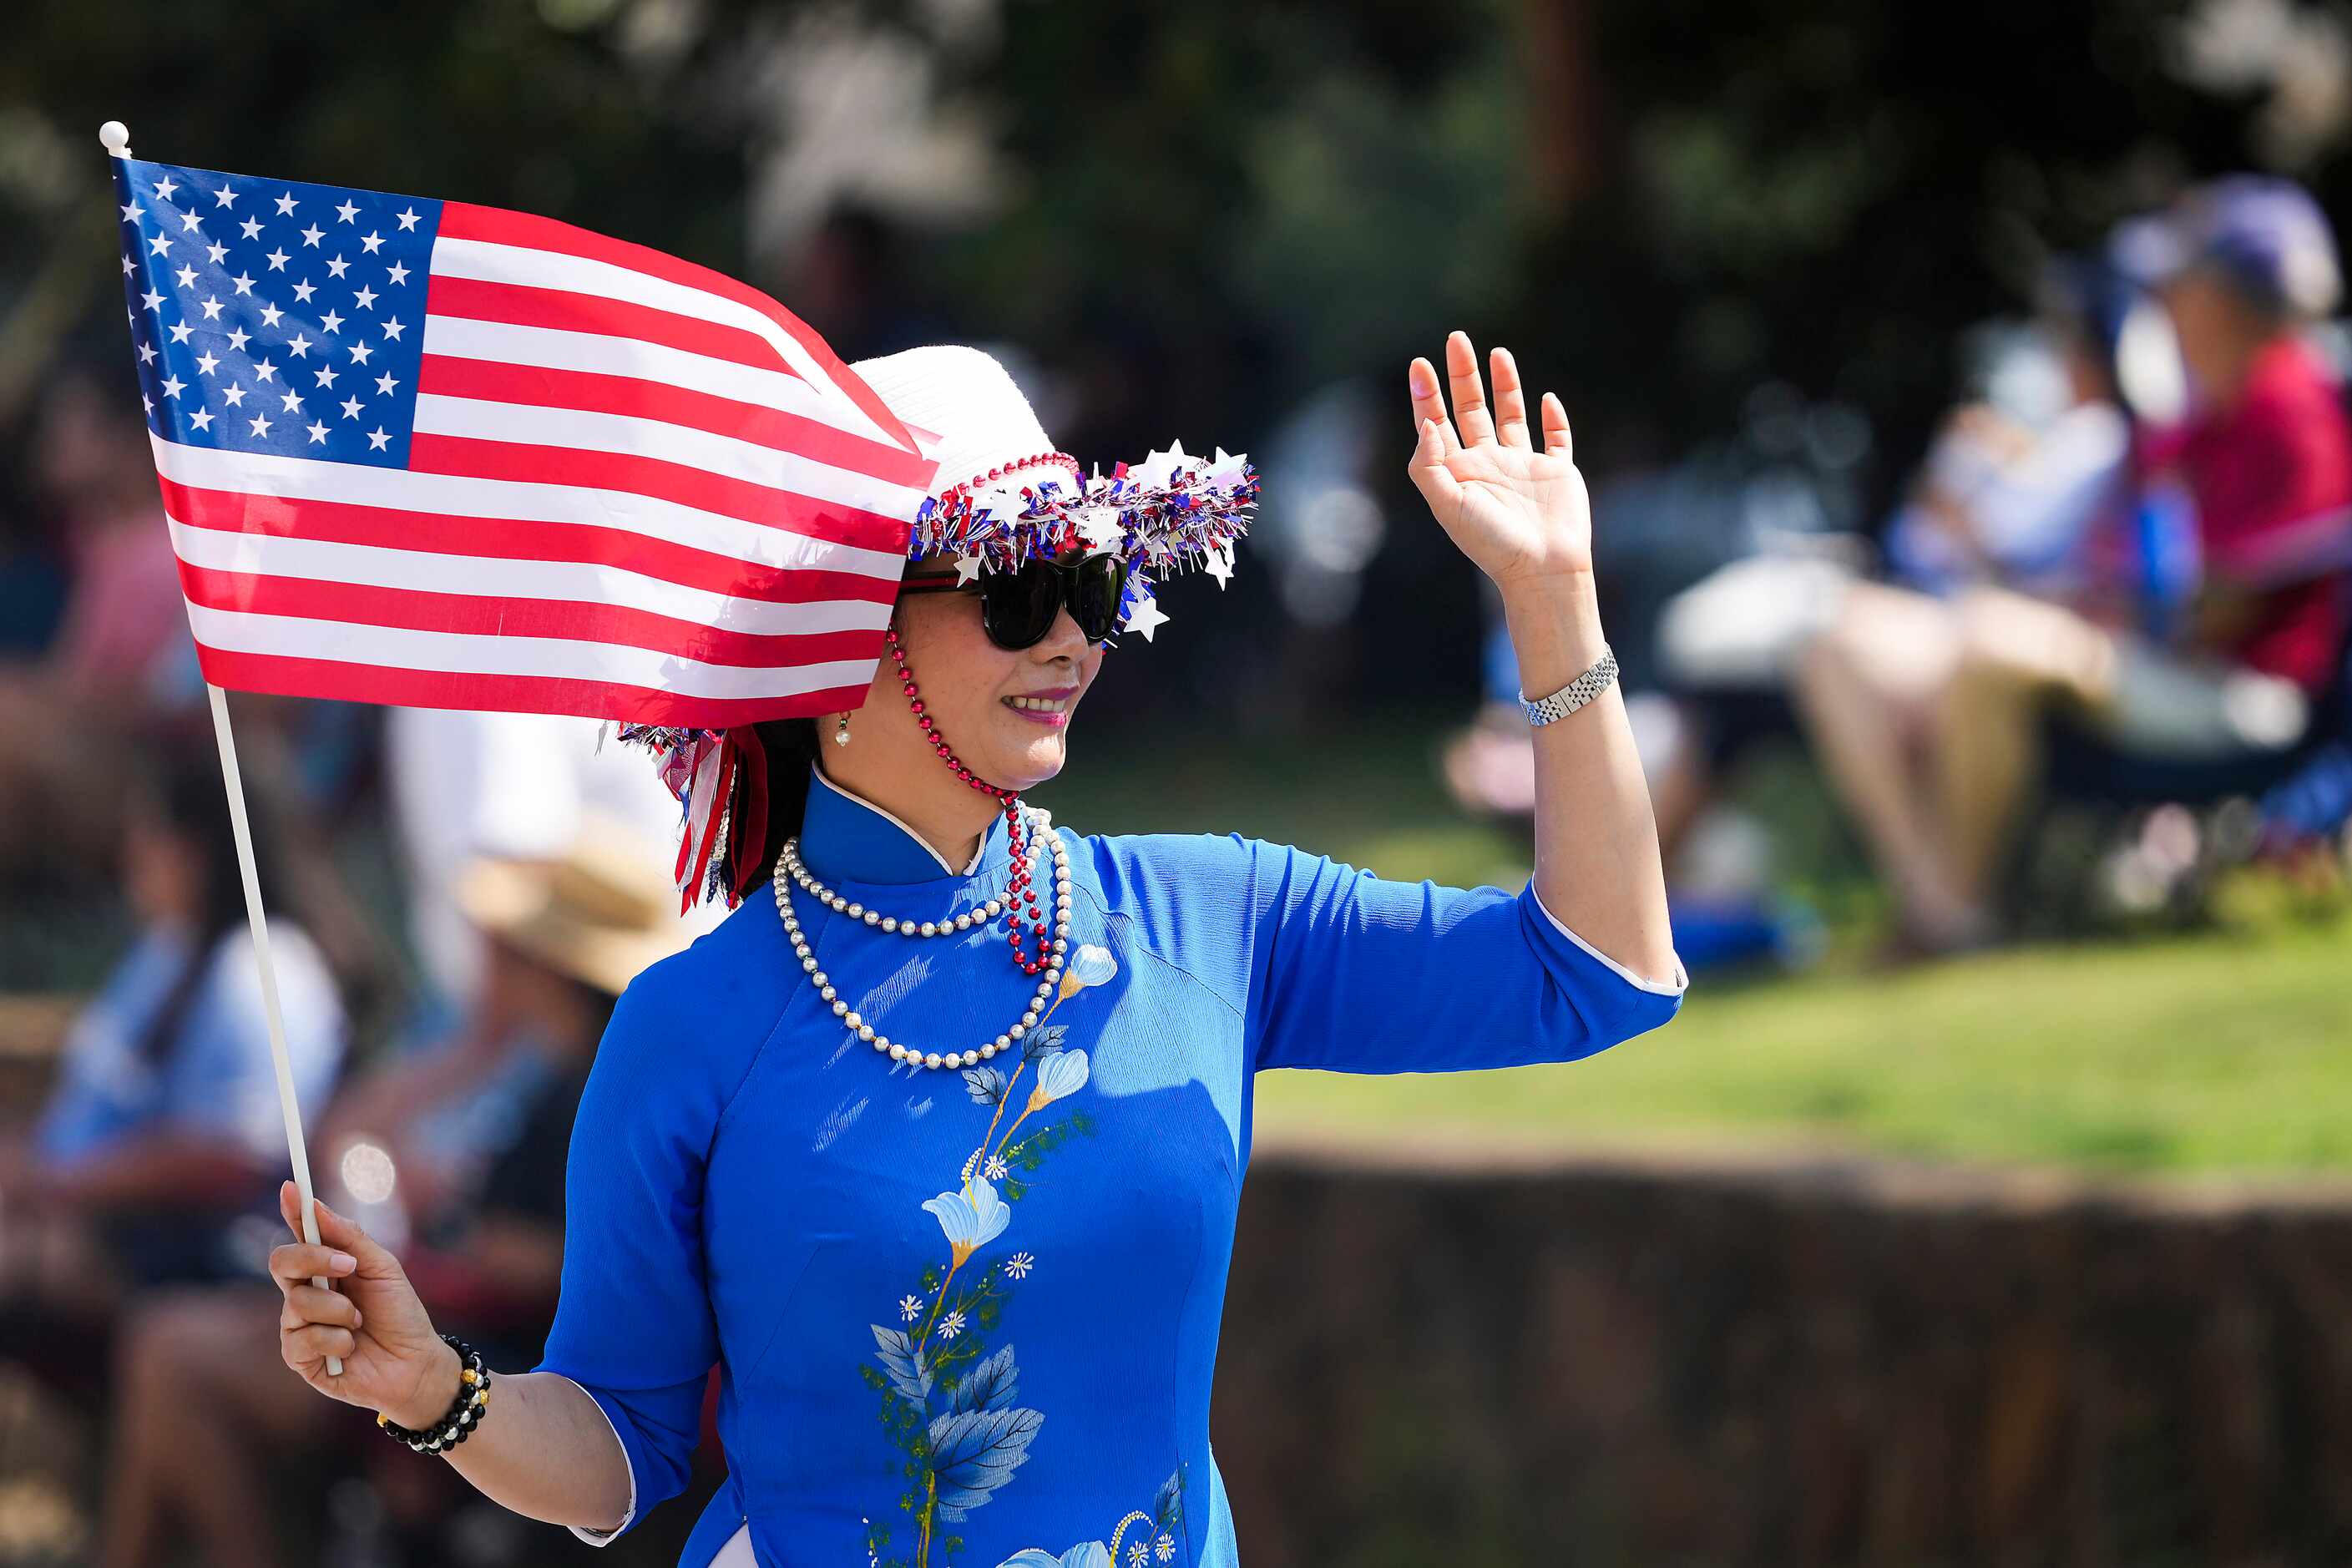 Hien Nguyen waves to spectators while marching with members of teh Vietnamese American...